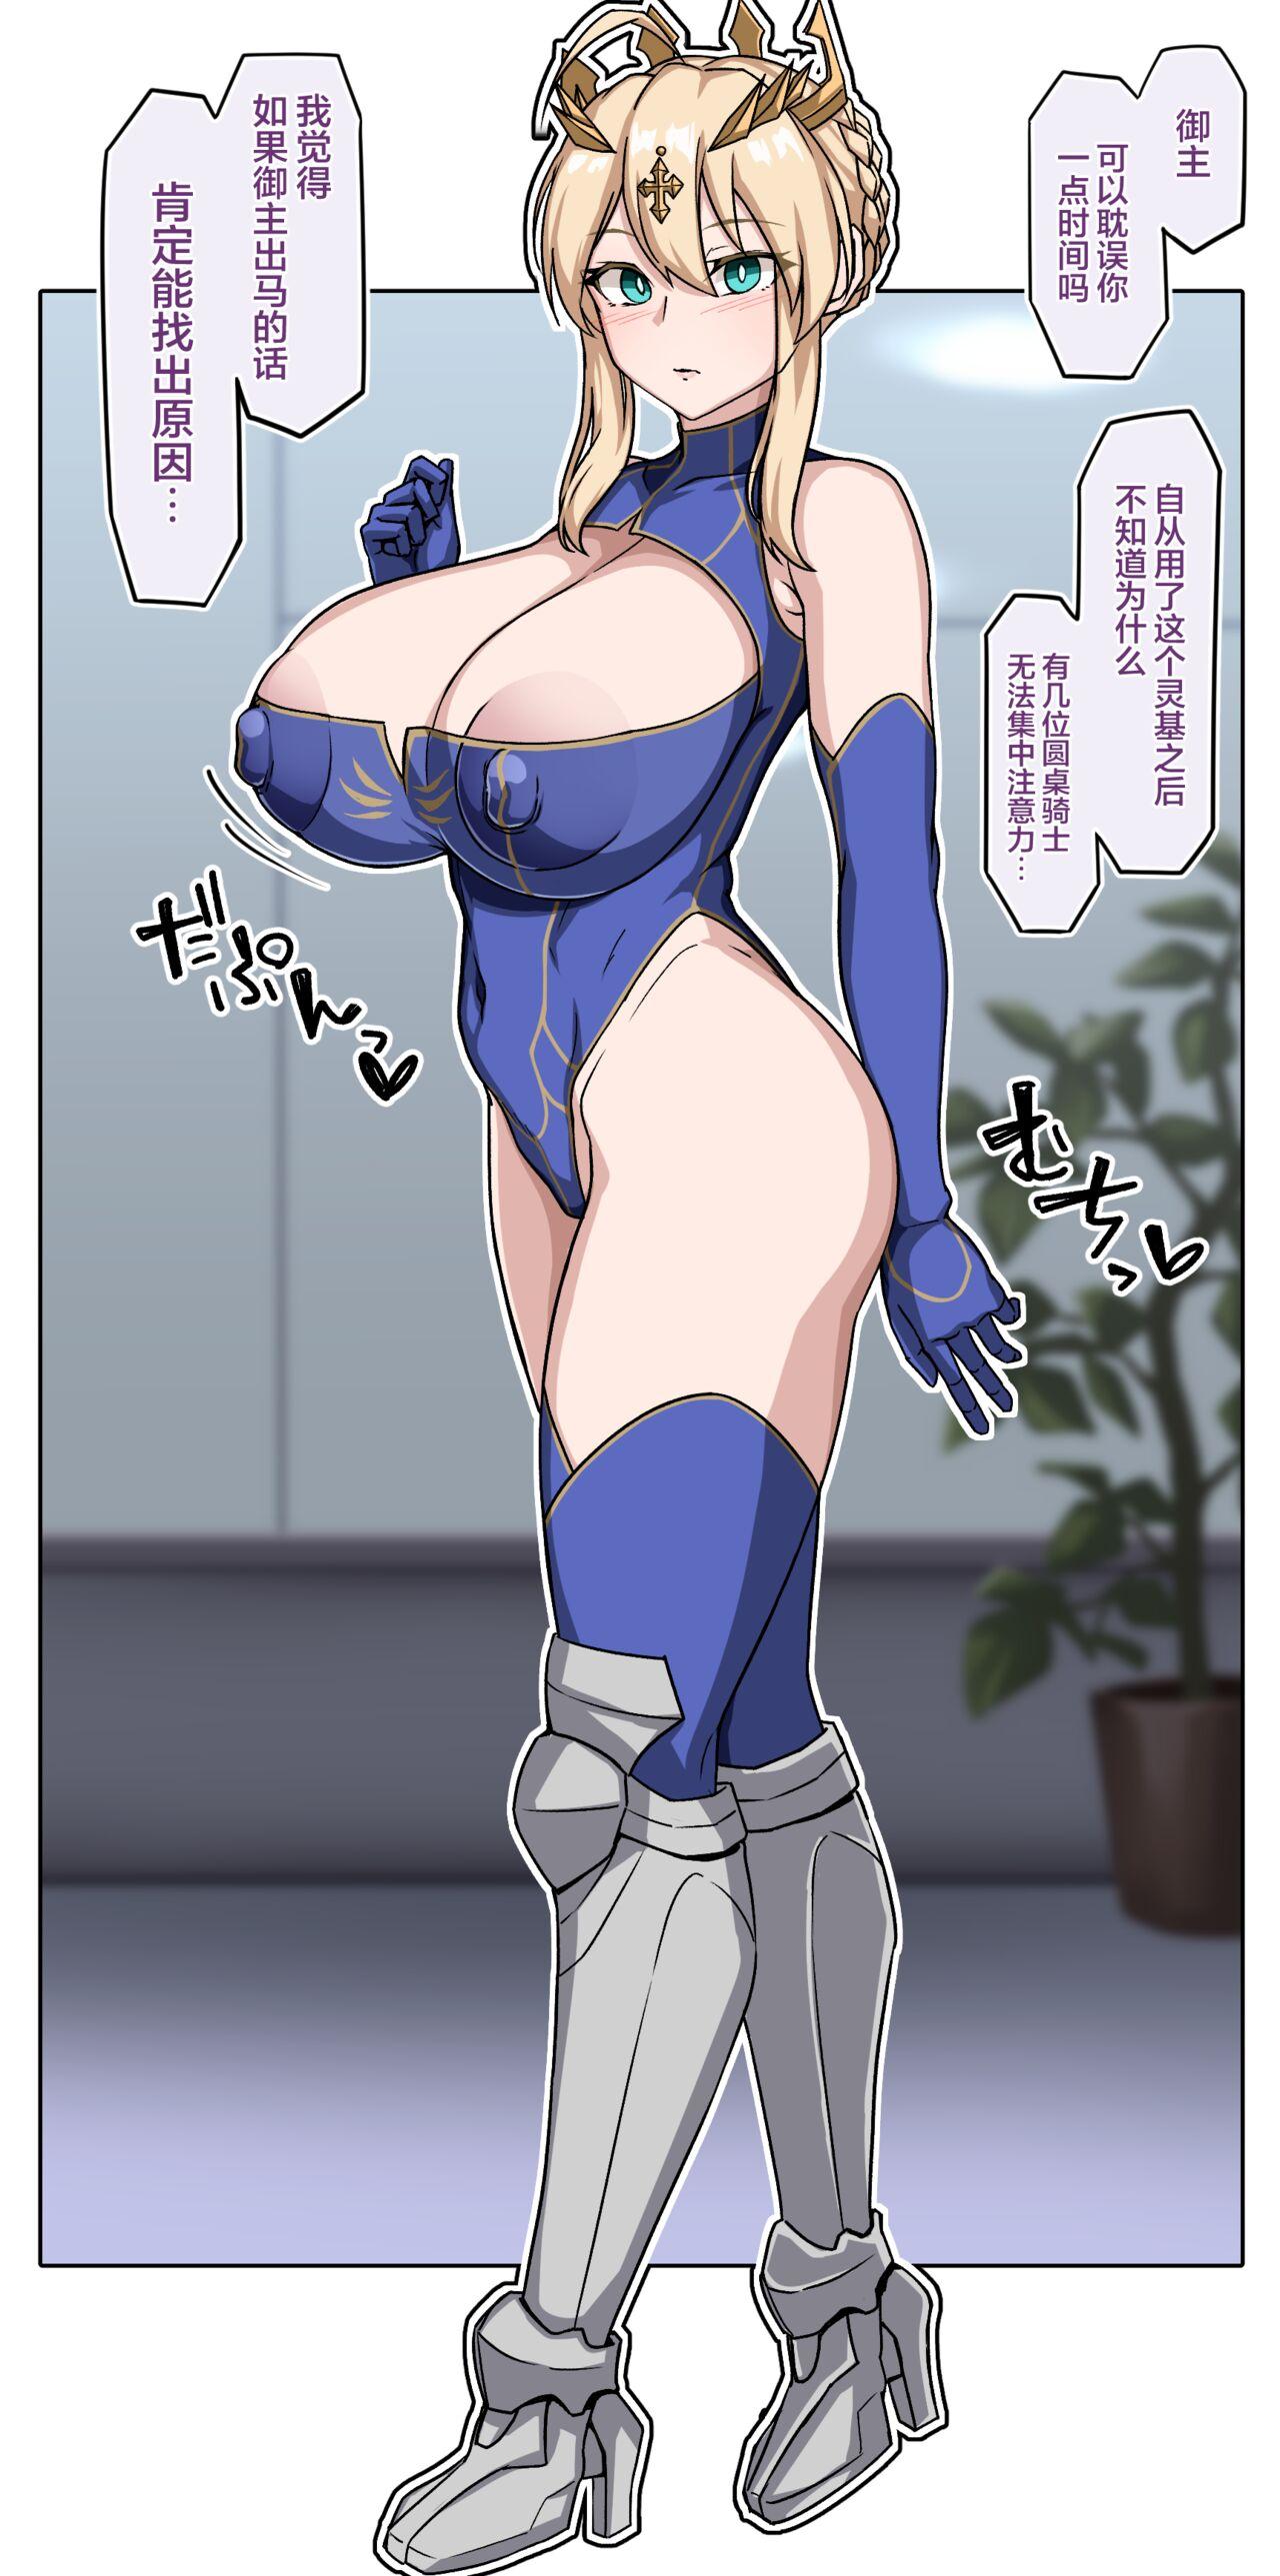 Whipping 乳上 - Fate grand order Blows - Page 2